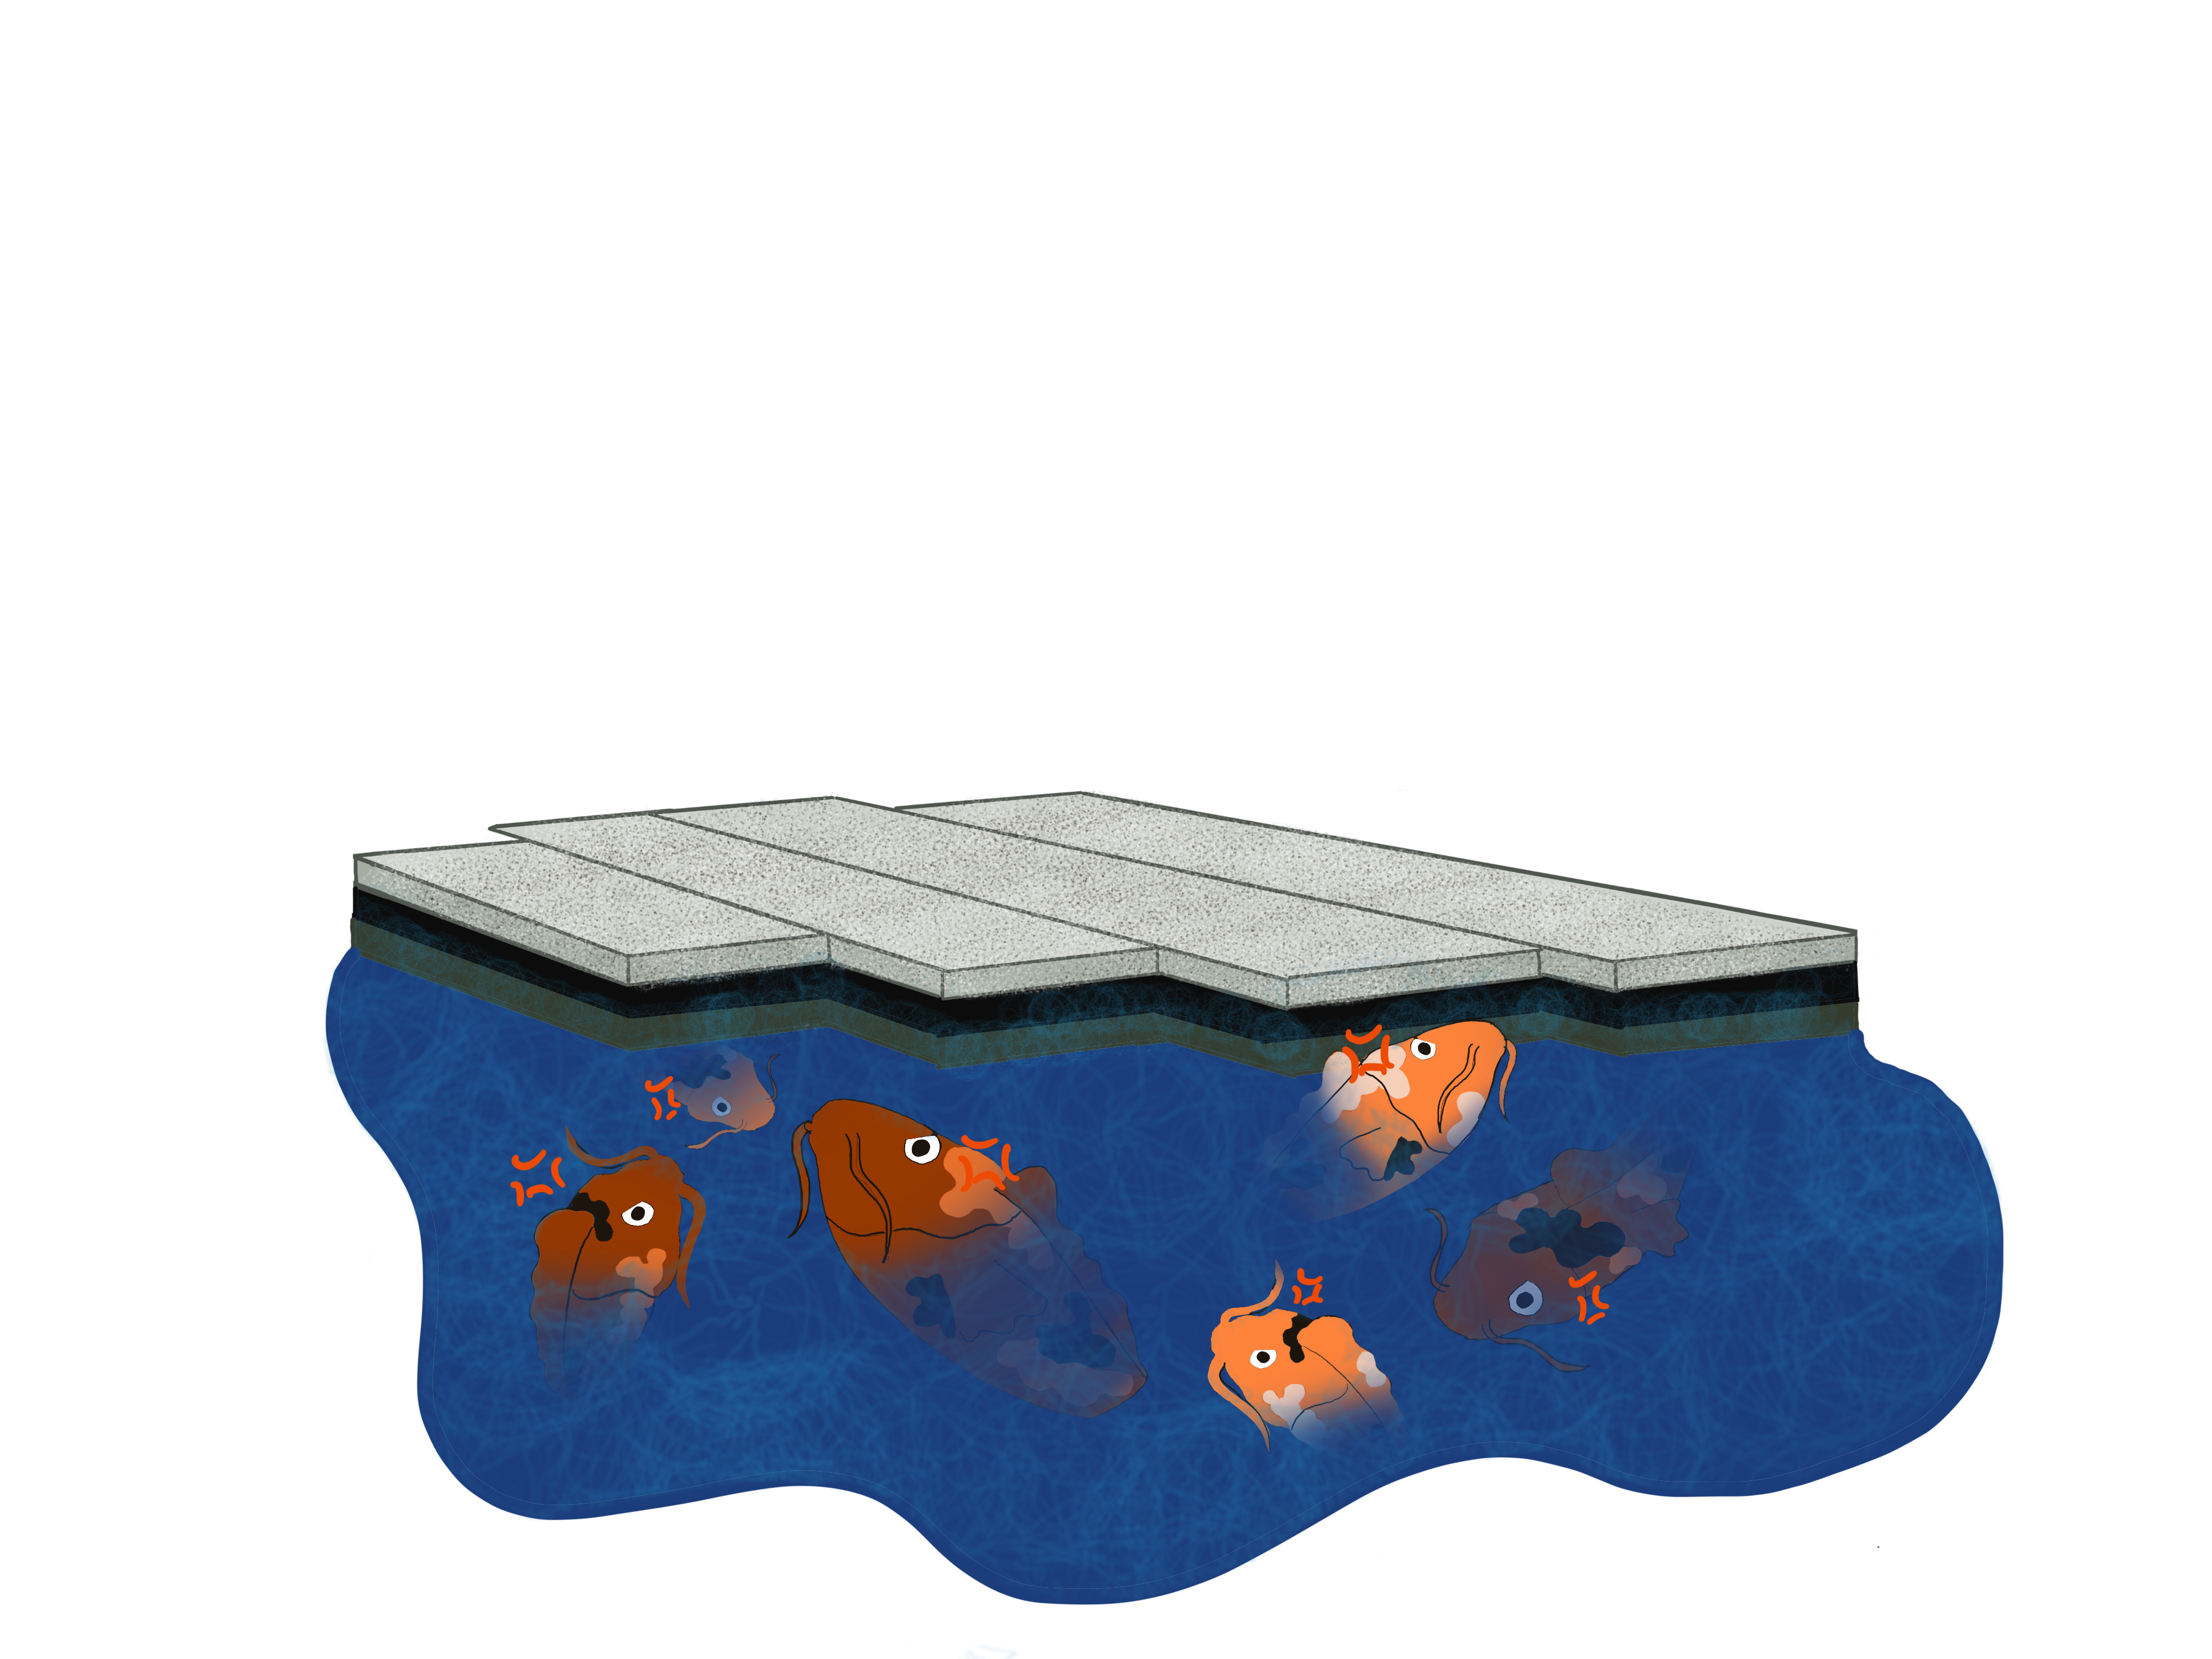 Illustration of the koi fish in AQ, looking visibly angry.